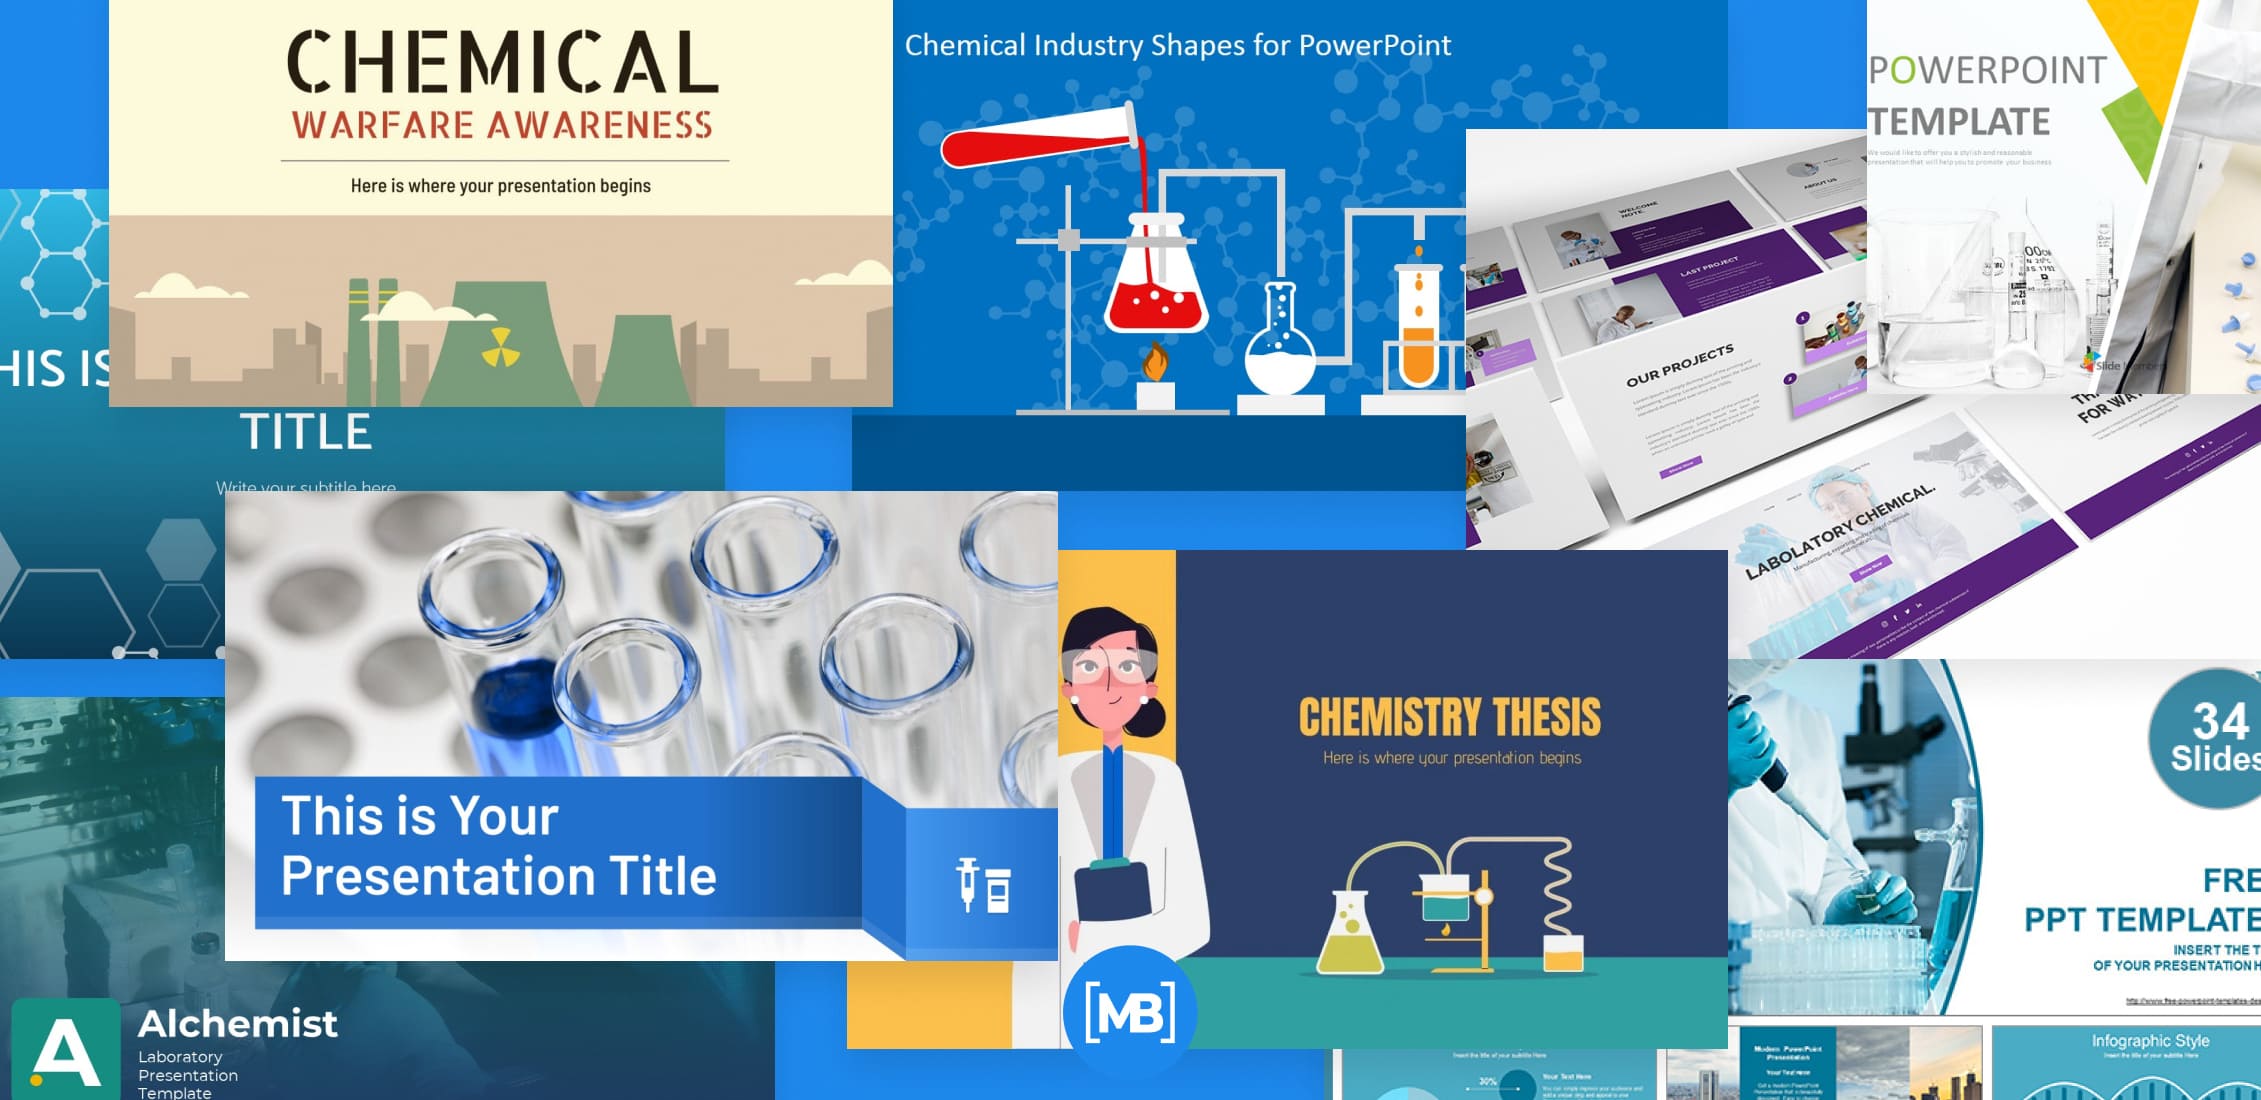 Best Chemistry Powerpoint Templates Example.